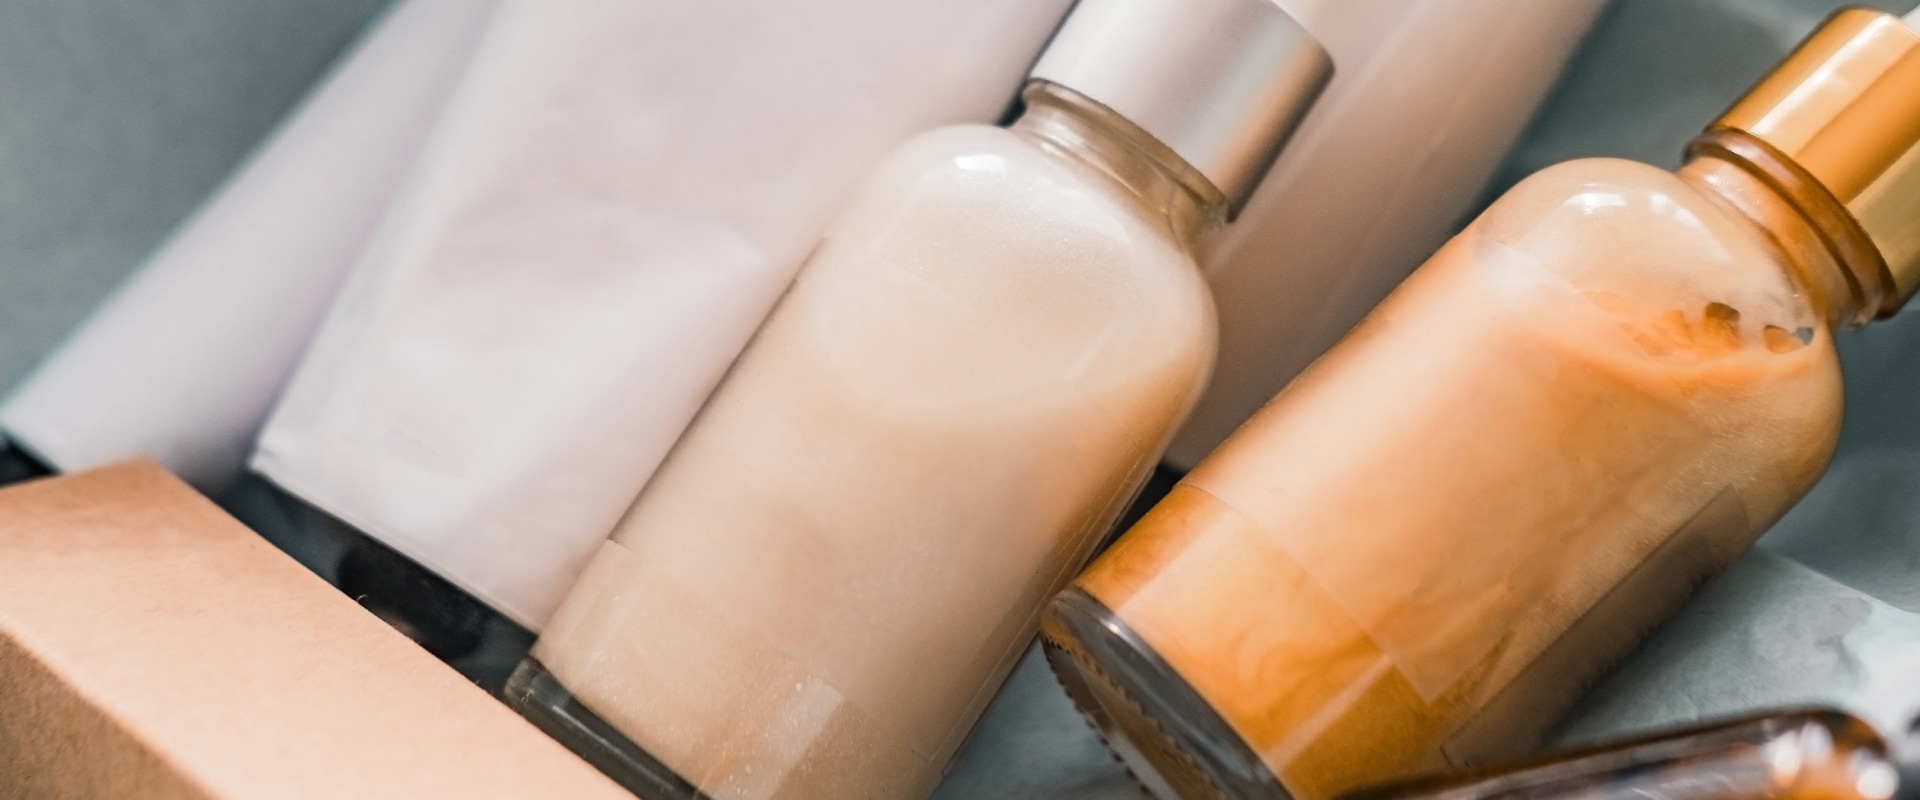 What are the 4 basic skin care products?